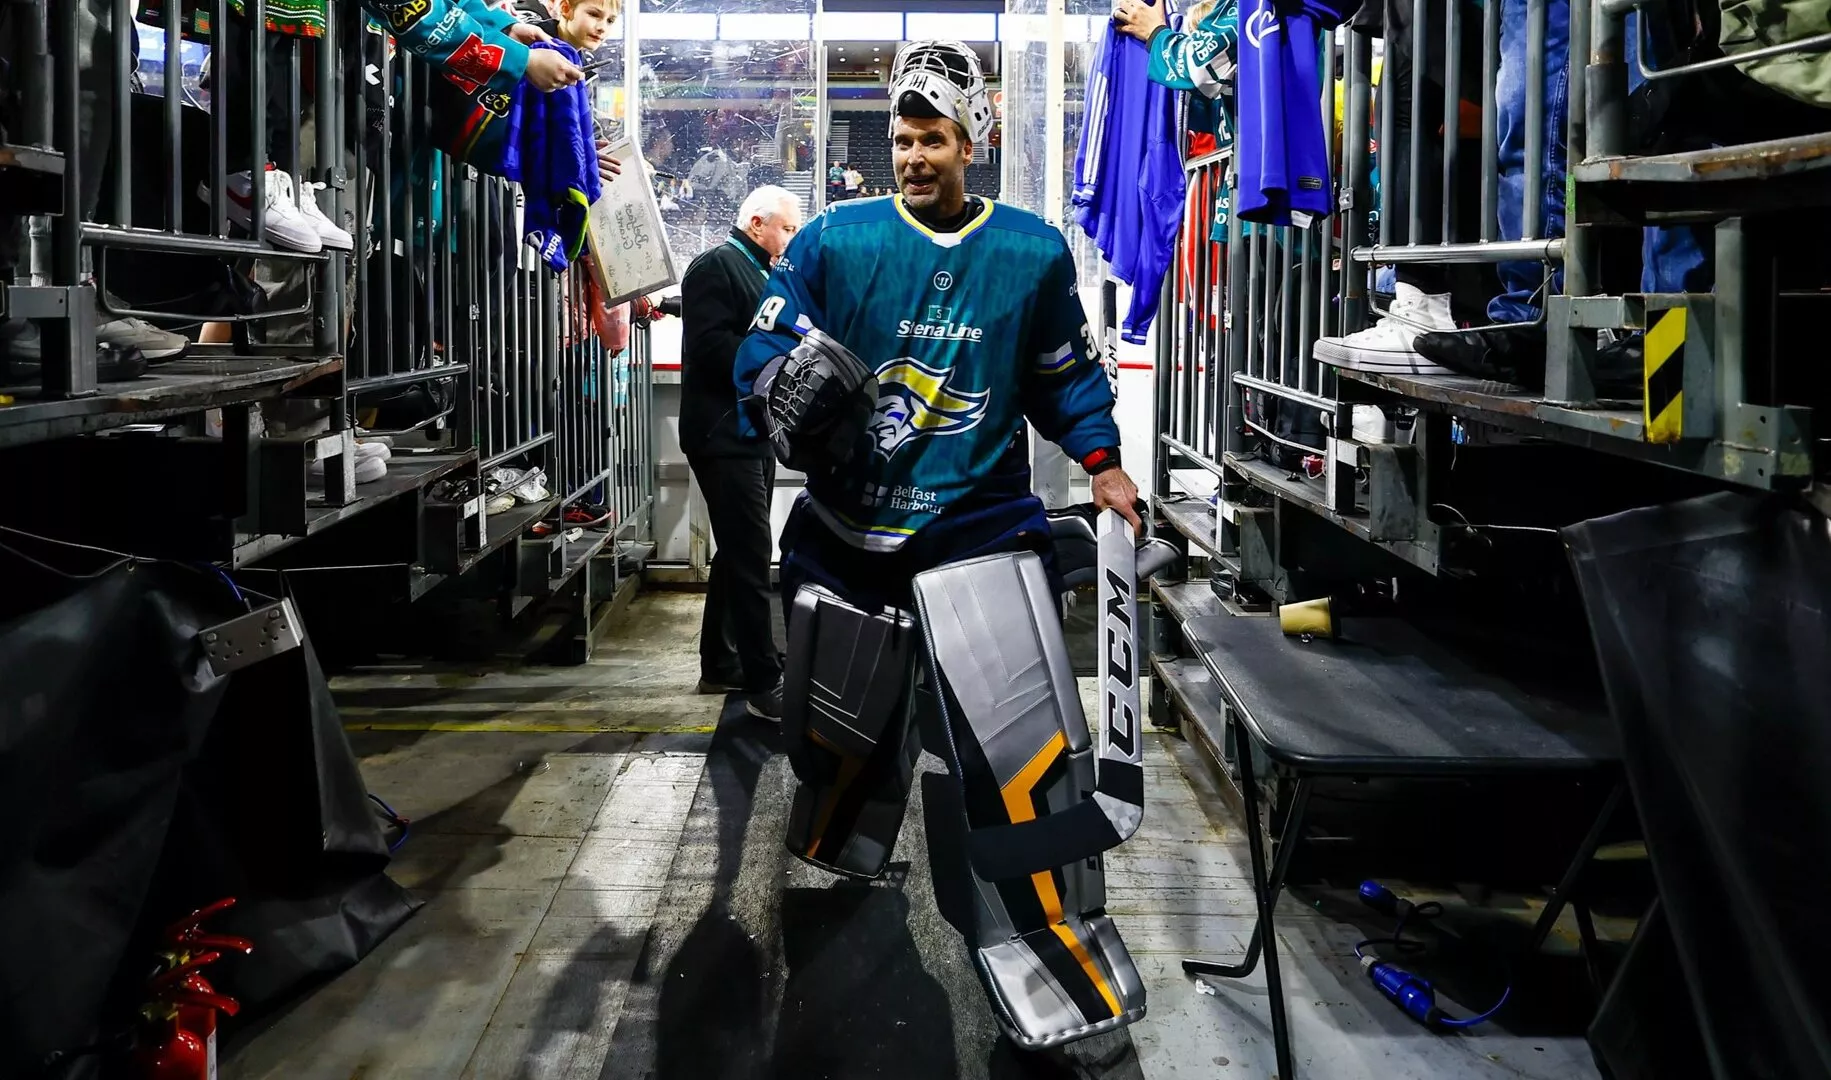 Chelsea legend Petr Cech makes his ice Hockey debut